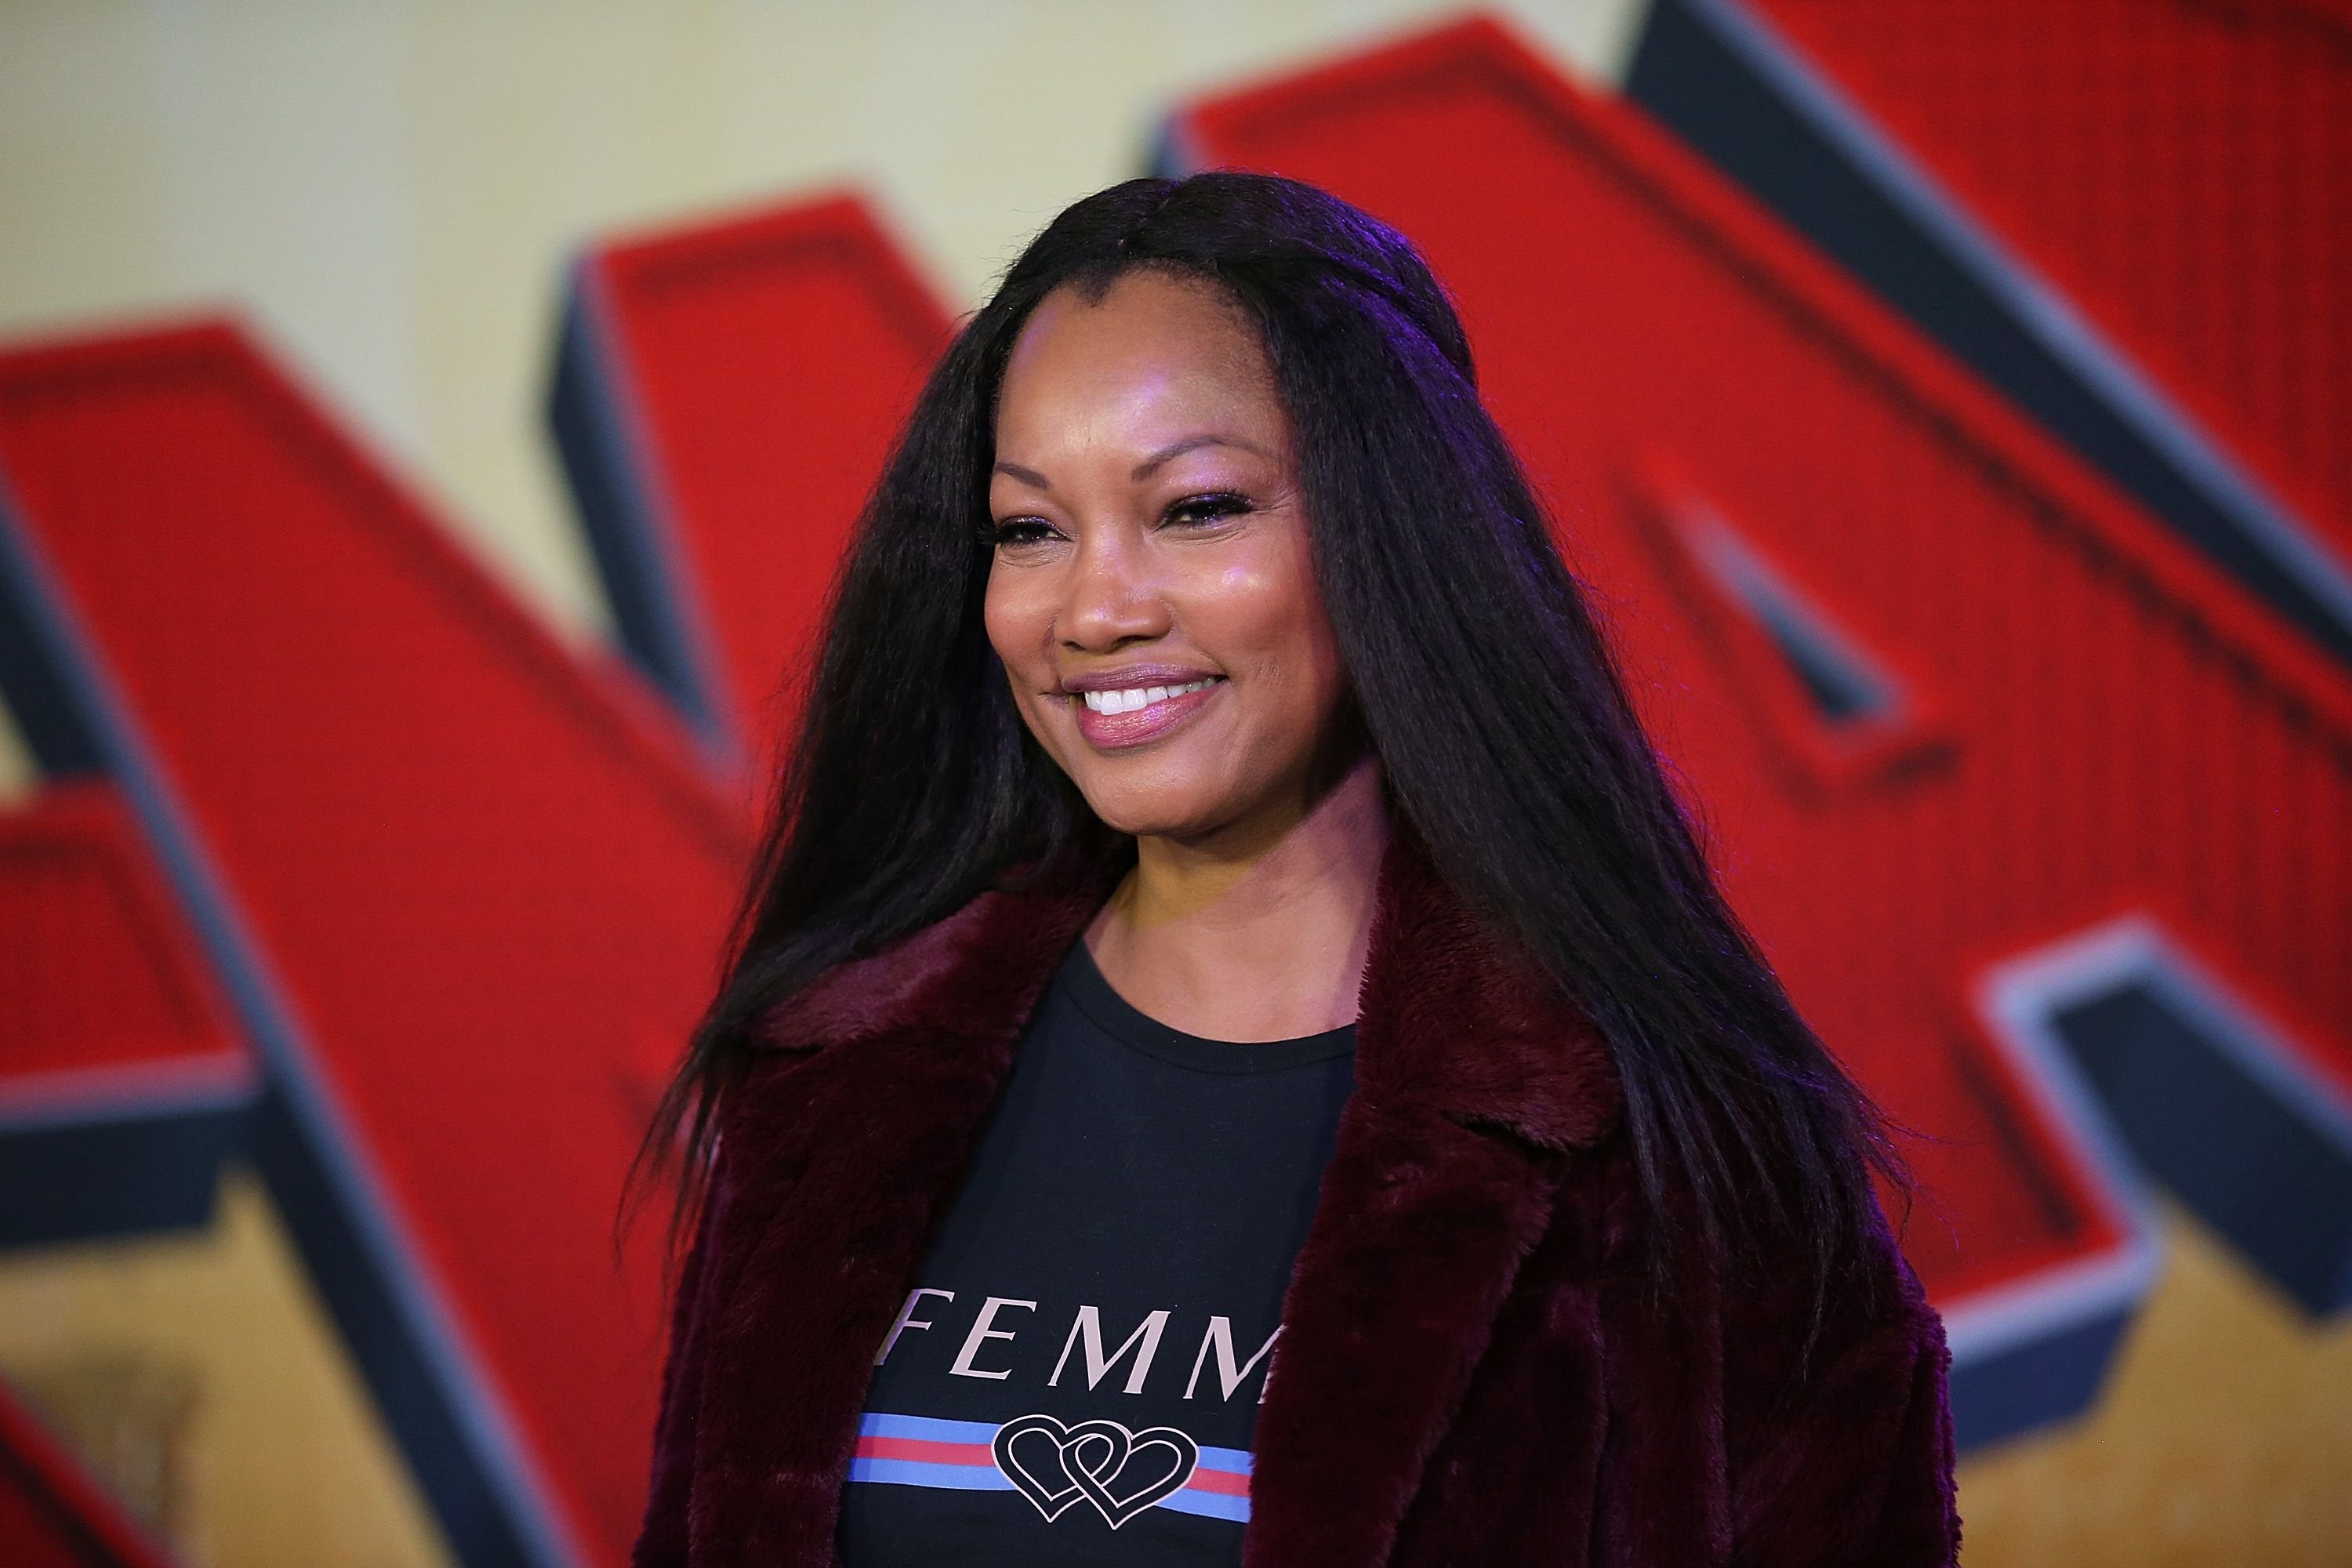 Garcelle Beauvais attends the world premiere of Sony Pictures Animation and Marvel's "Spider-Man: Into The Spider-Verse" at Regency Village Theatre on December 1, 2018 | Photo: Getty Images